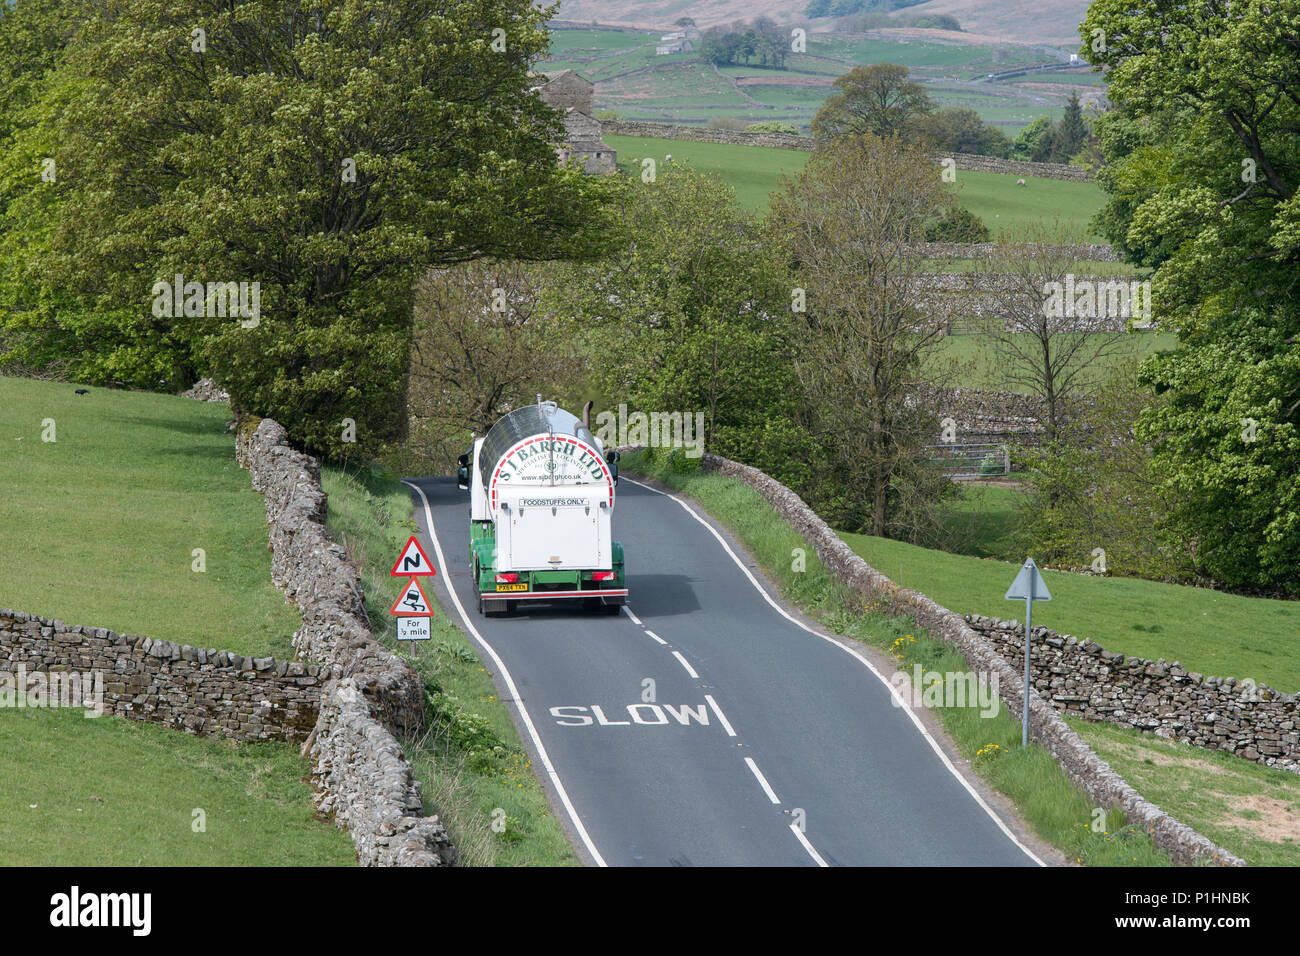 Milk tanker on the road to Hawes and the Wensleydale Creamery dairy where Wensleyday cheese is made. North Yorkshire, UK. Stock Photo